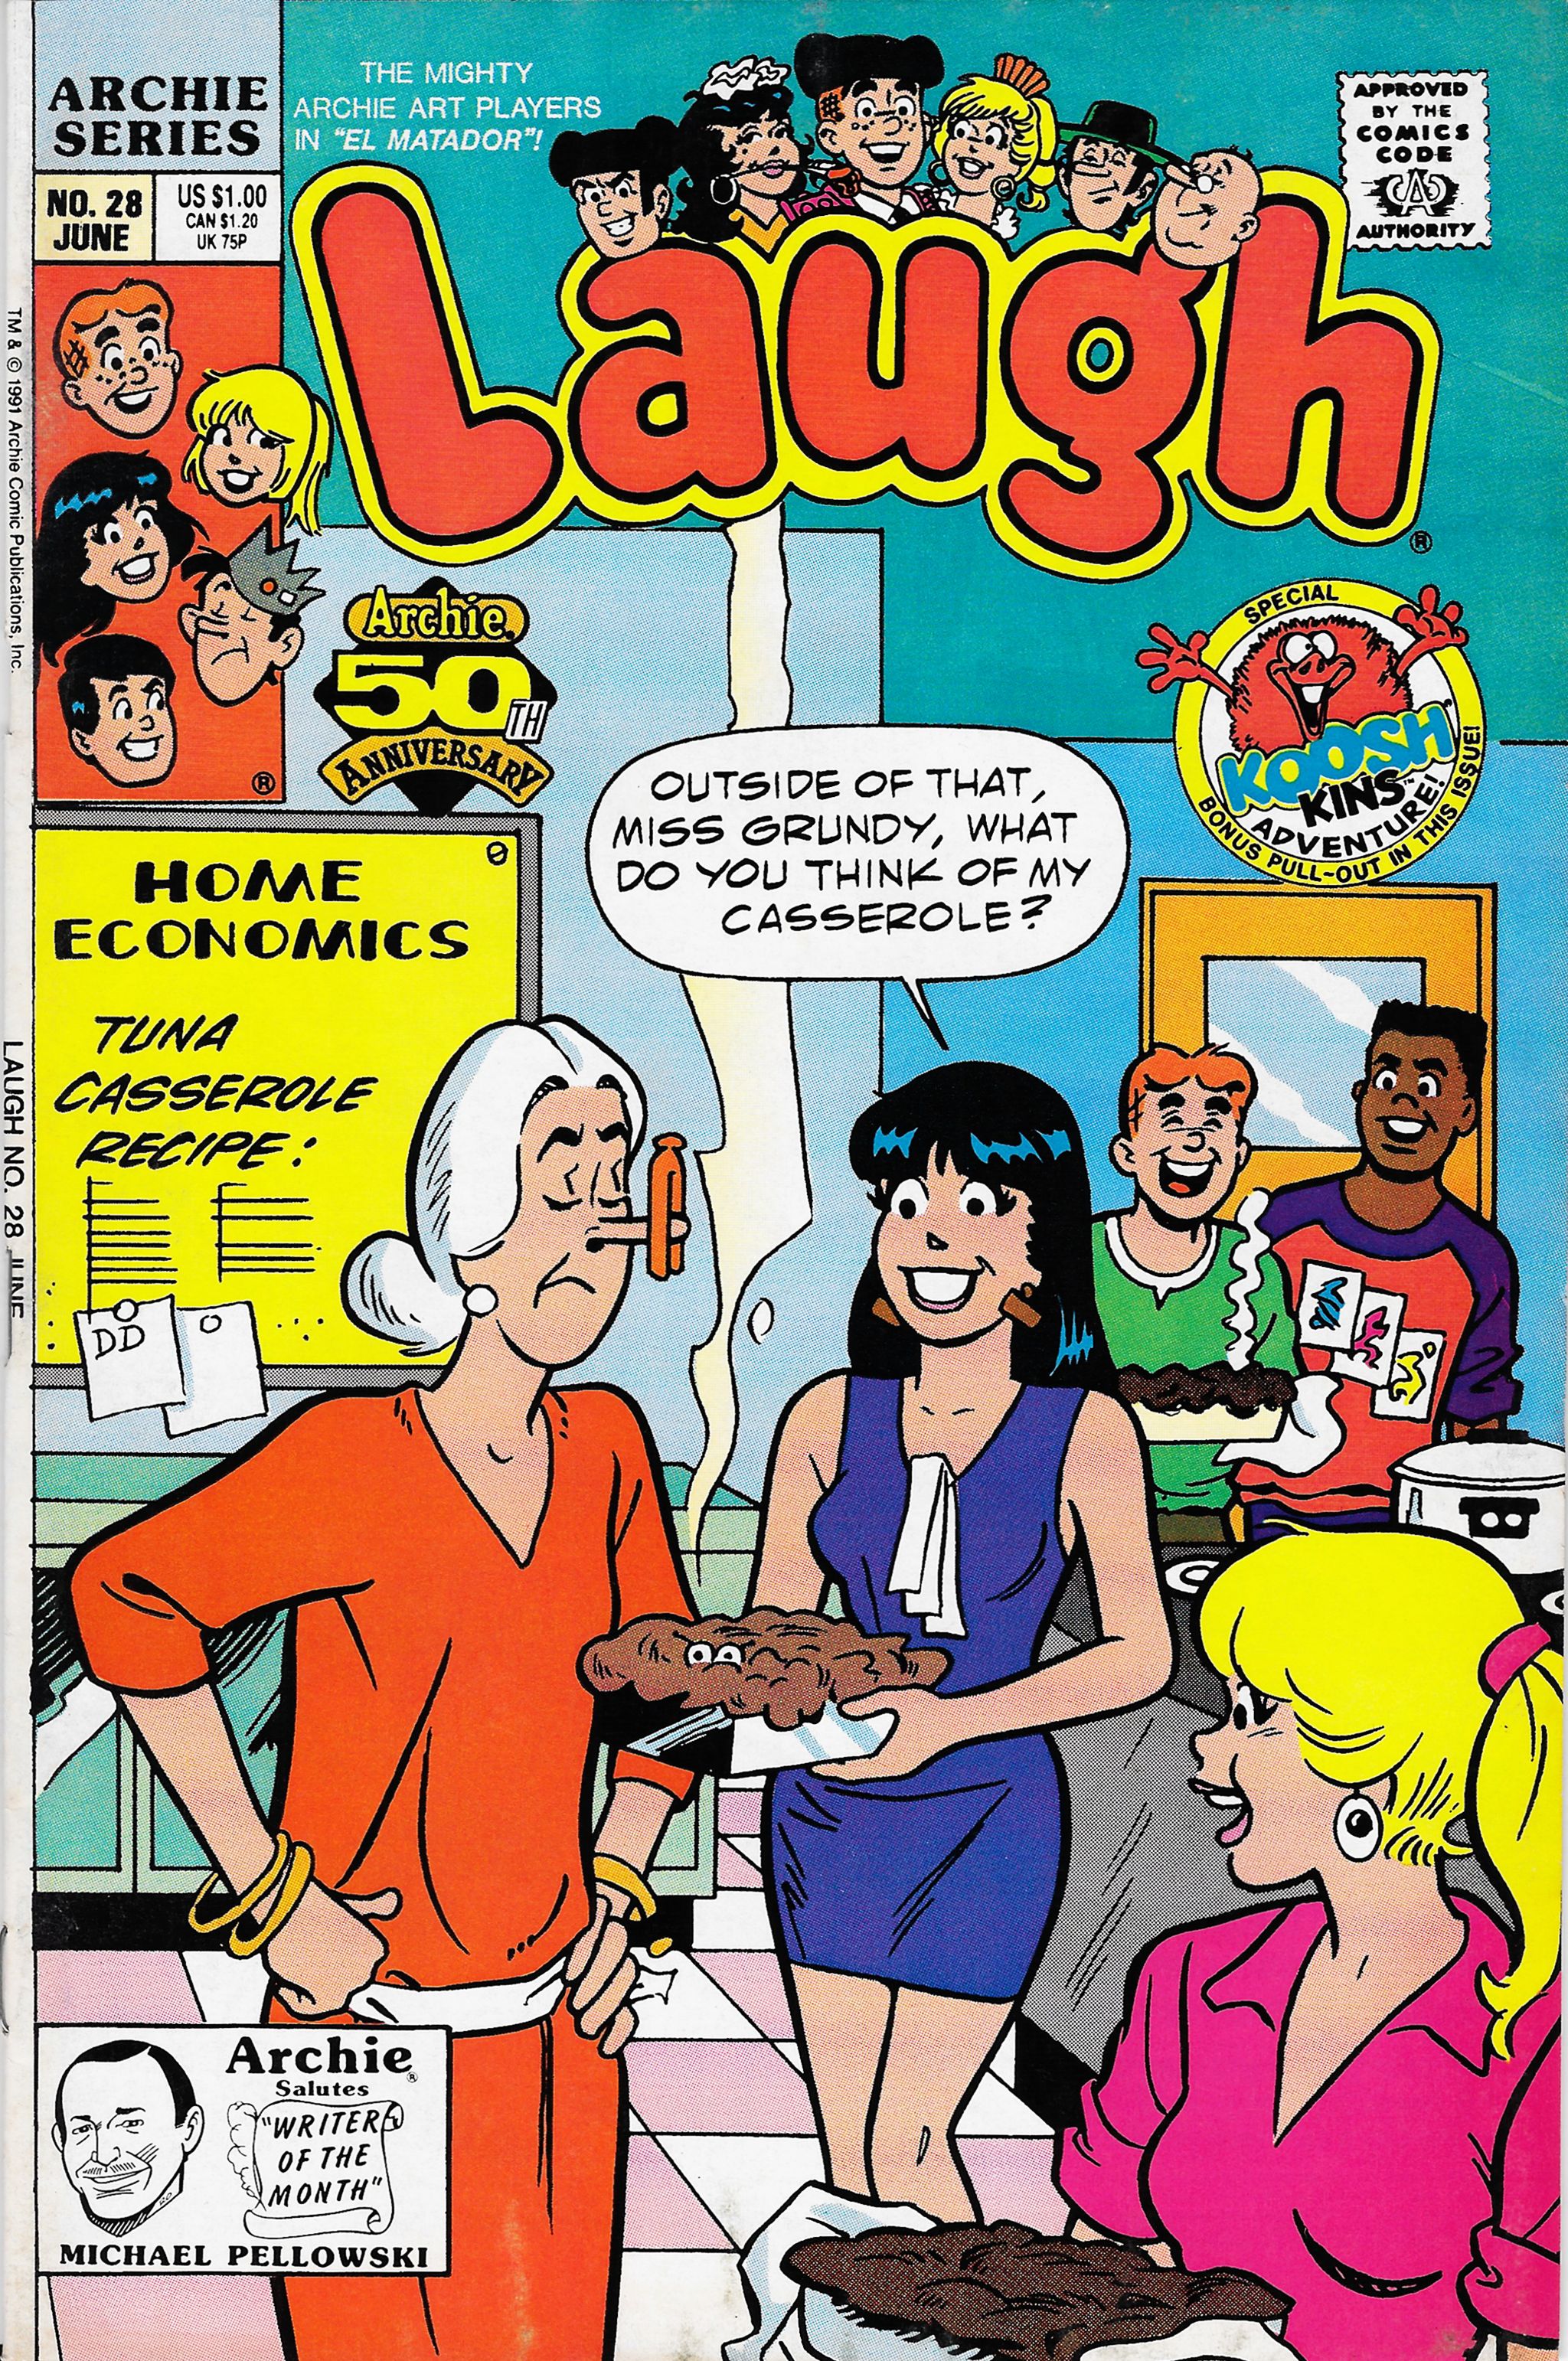 Read online Laugh comic -  Issue #28 - 1